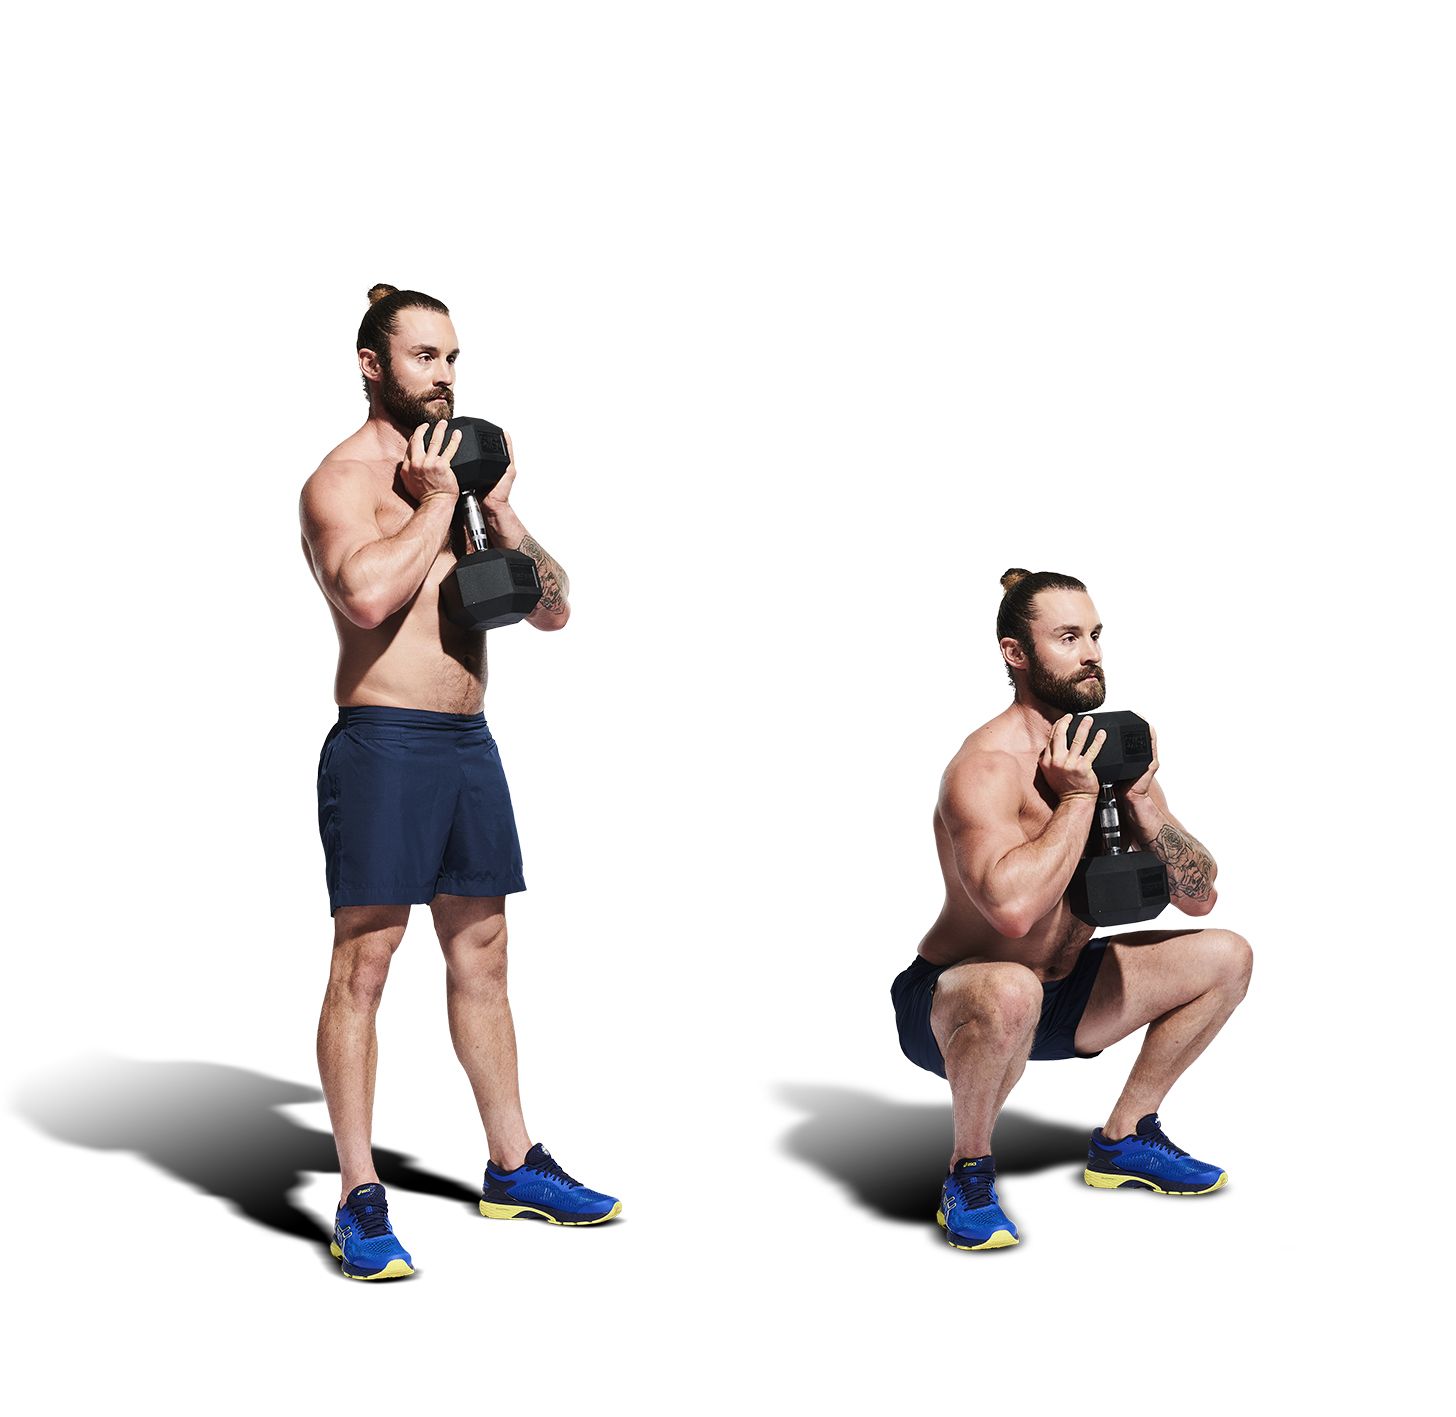 The Dumbbell Squat: Proper Form, Benefits, and Variations - The